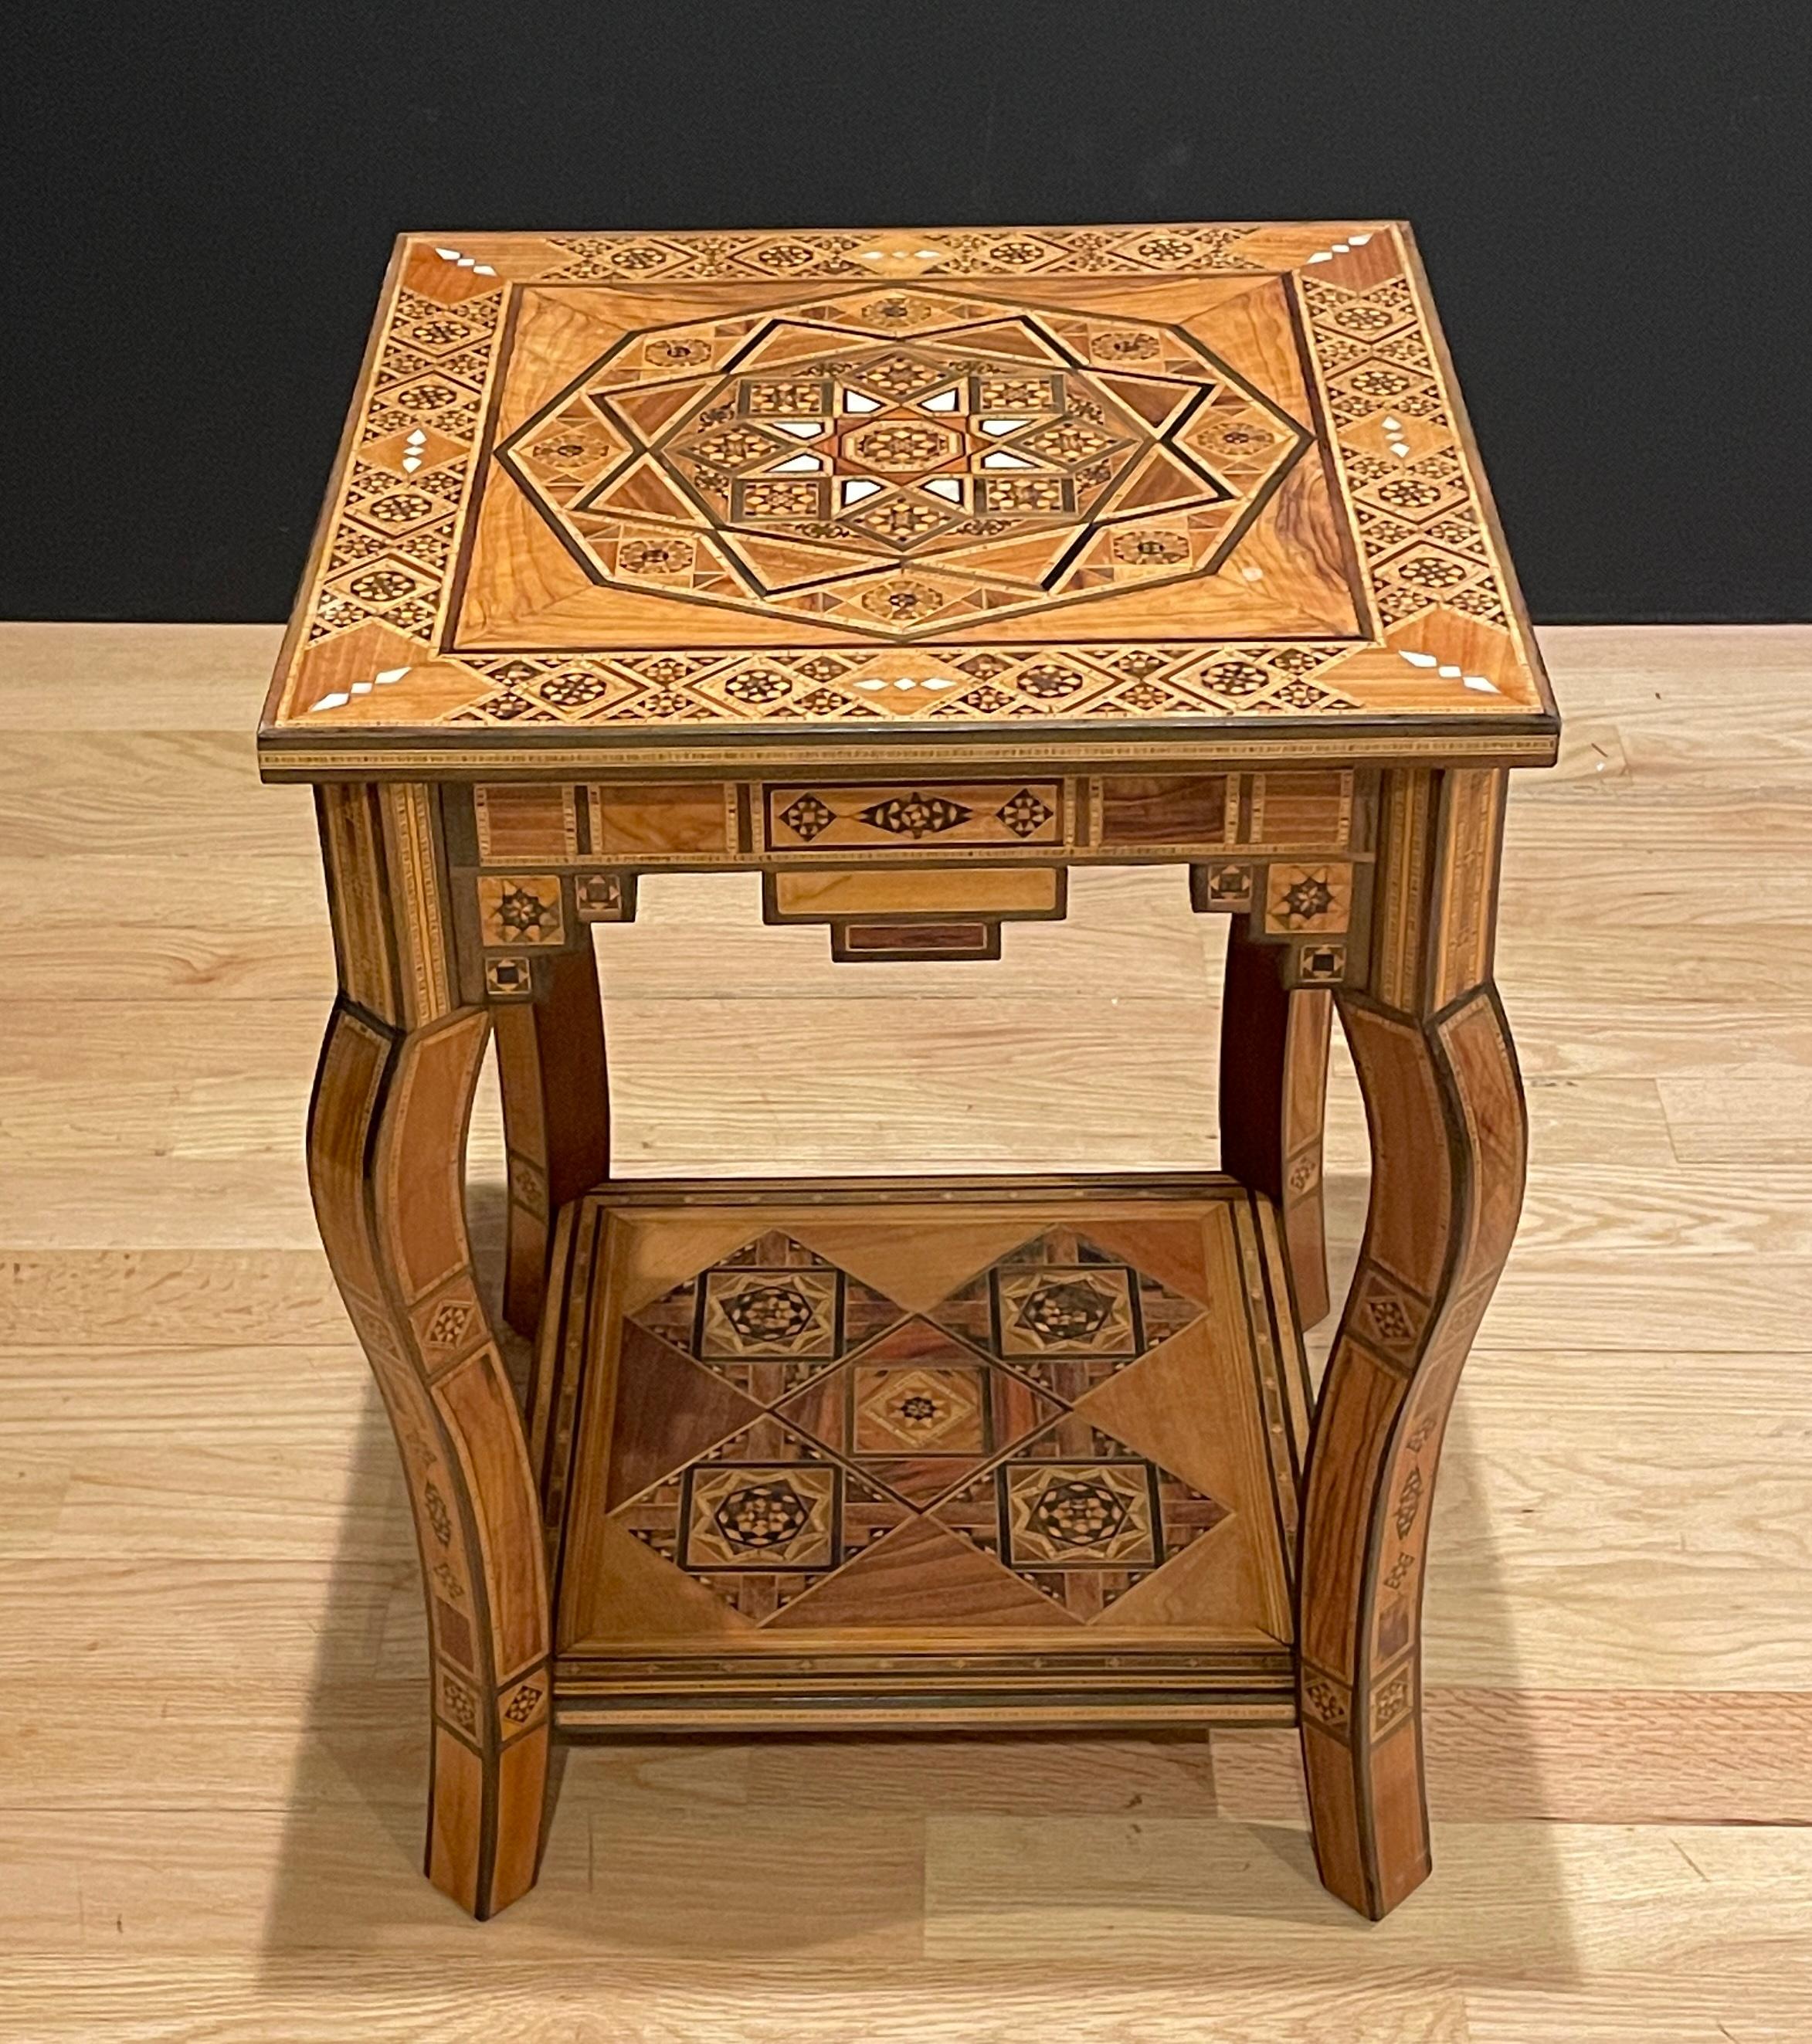 Specimen wood and mother of pearl Syrian/Turkish square side table with lower shelf.